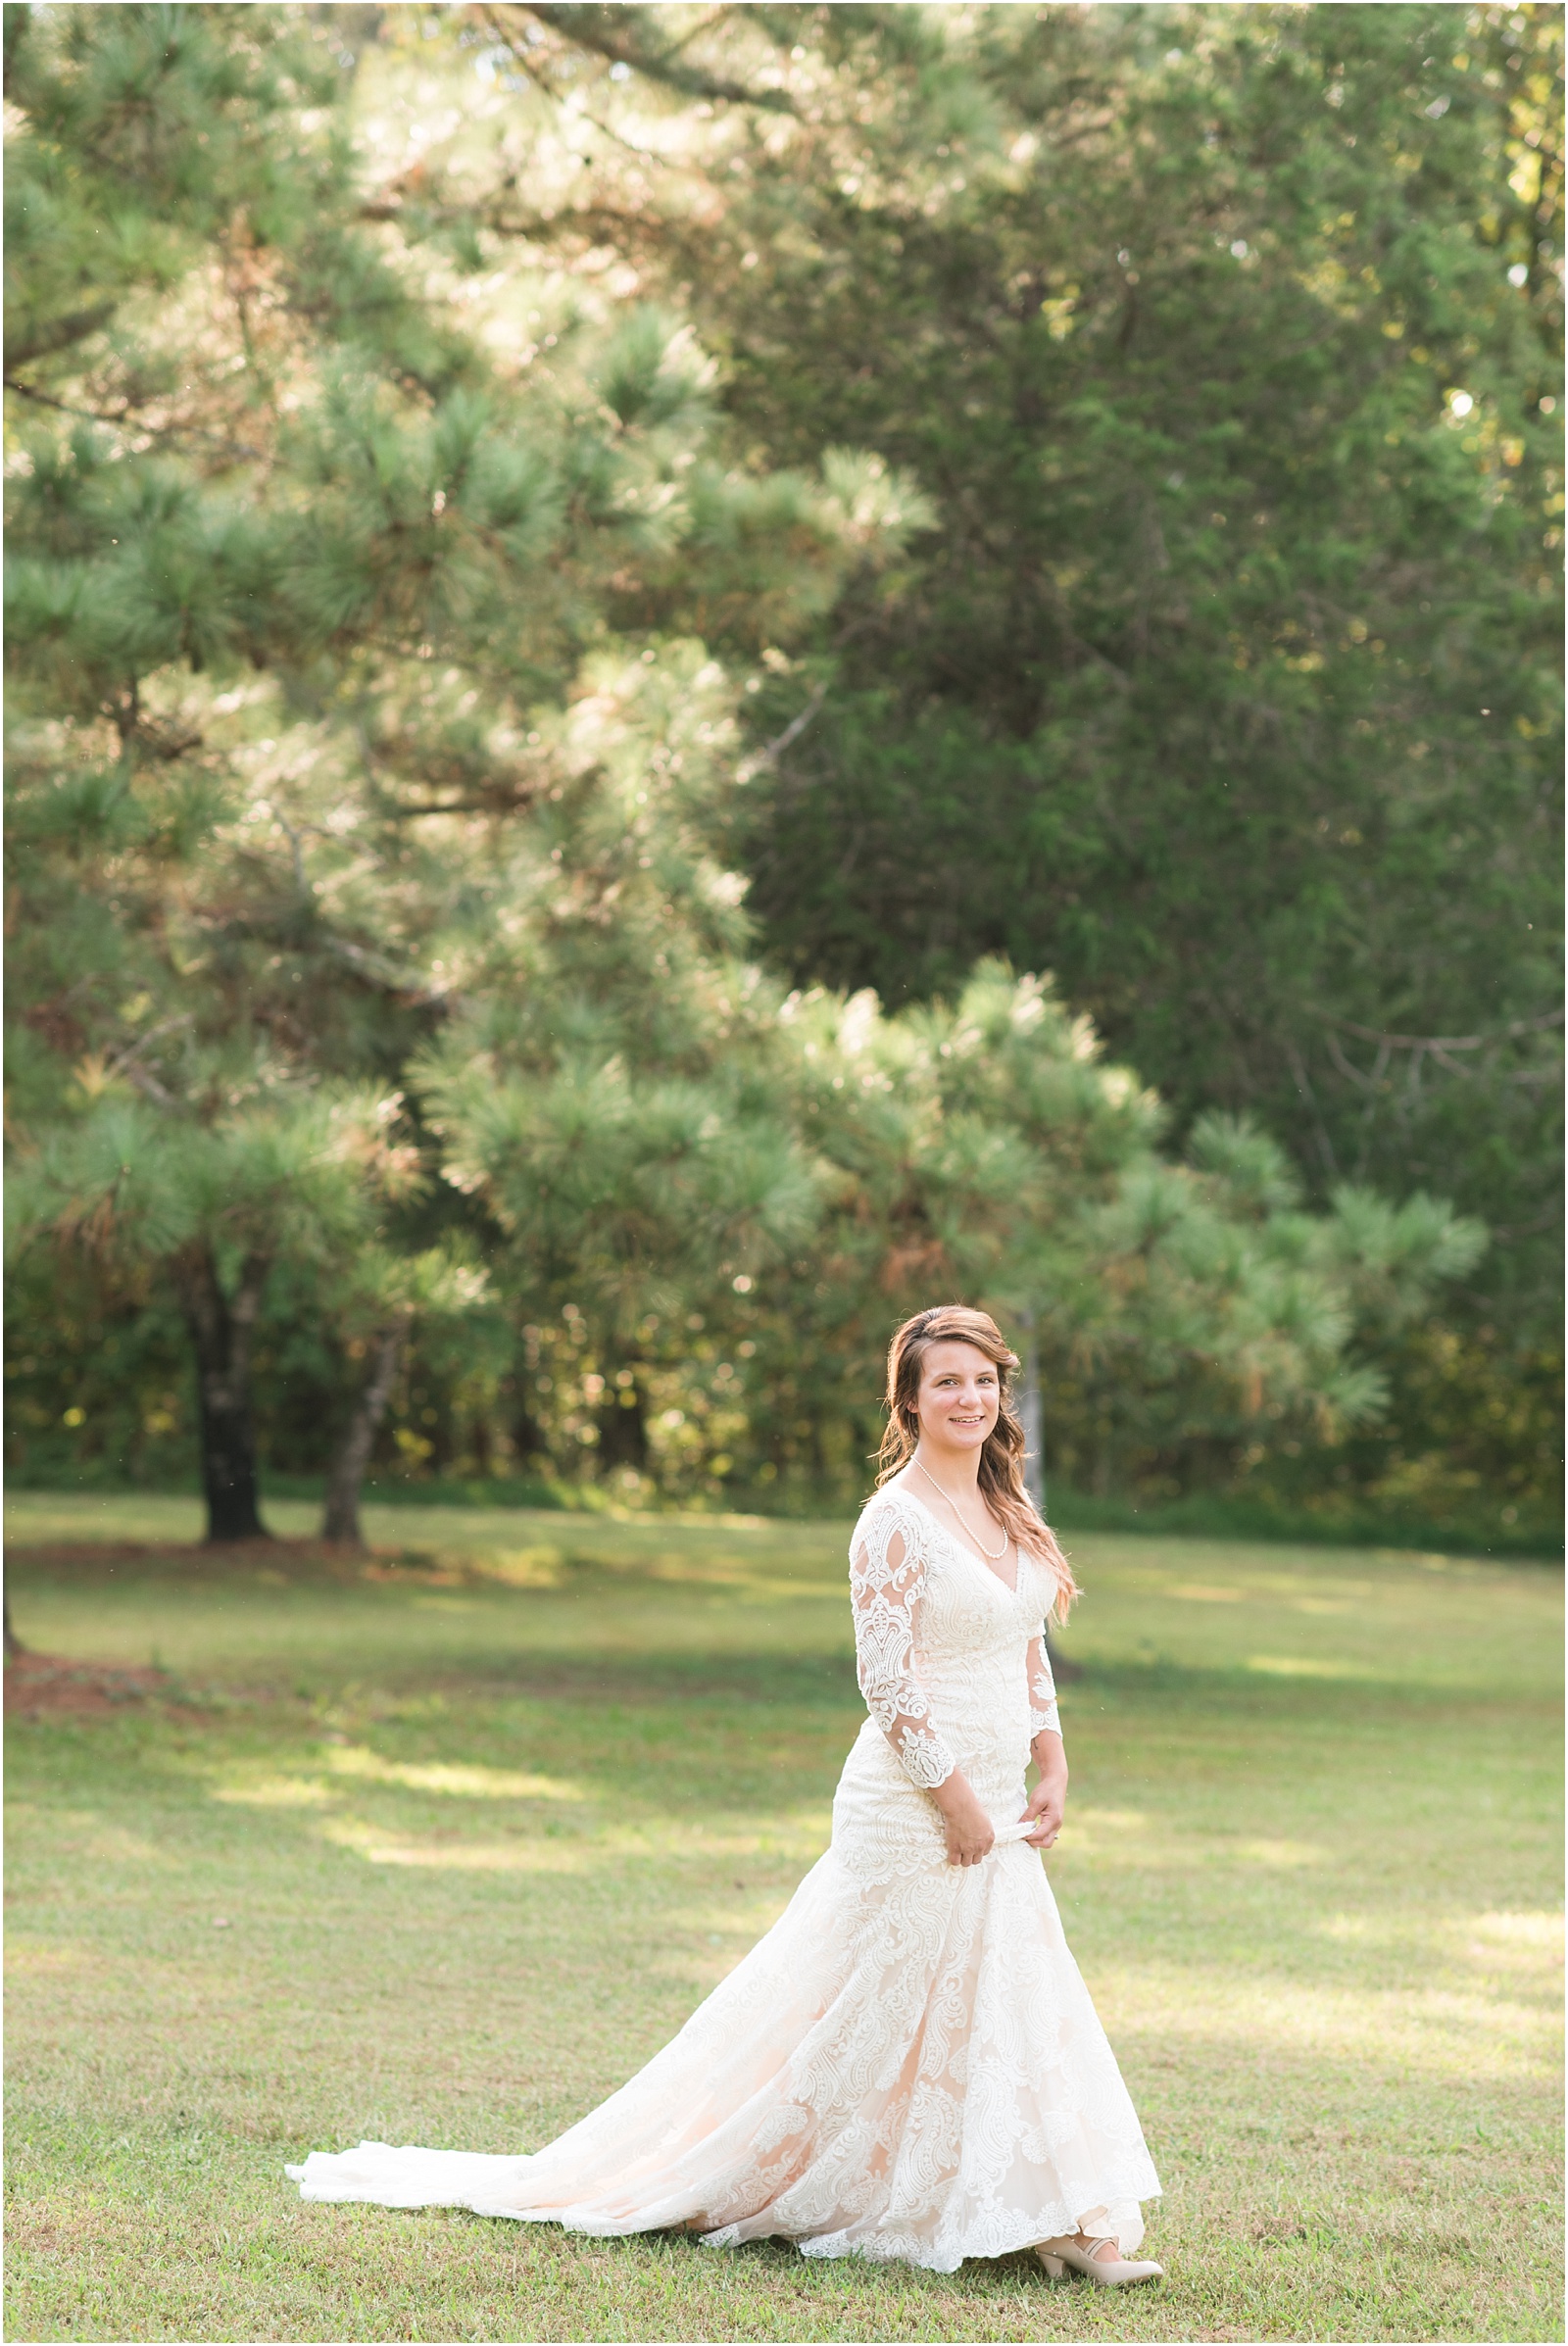 bride holding chamange dress walking across a grassy field looking at the camera smiling